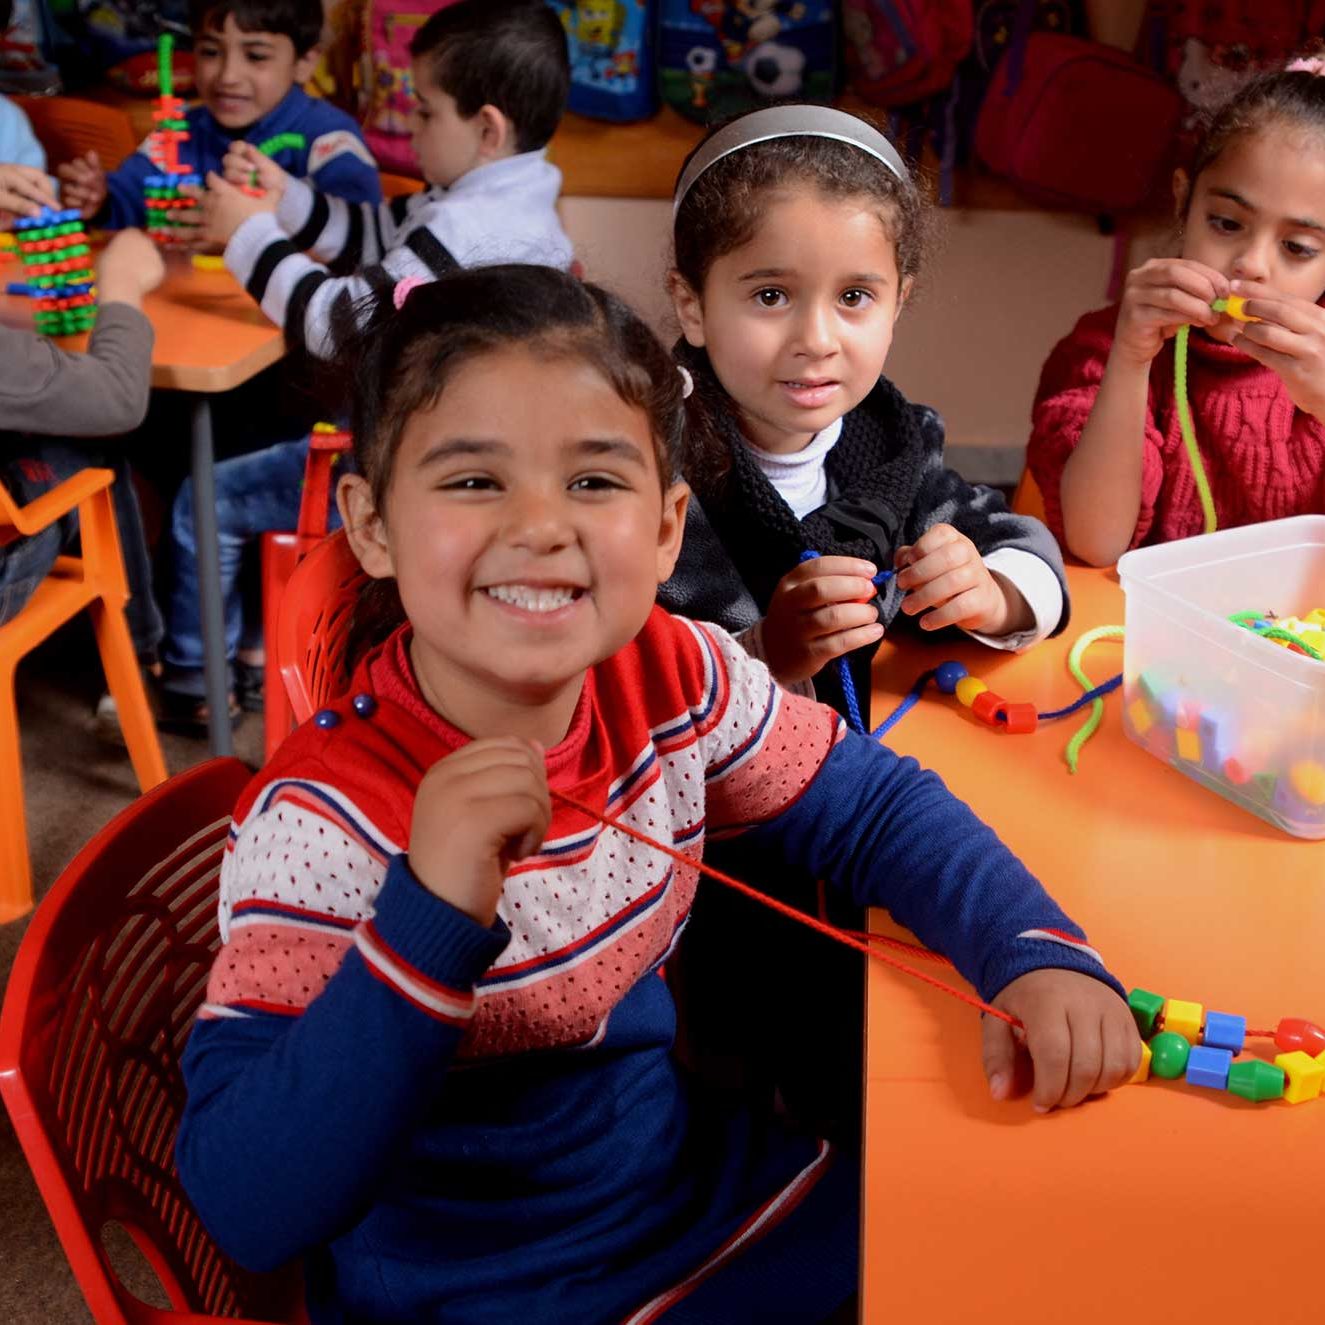 Anera has been supporting the construction of a preschool curriculum framework that prepares Palestine’s youngest children for a better future.